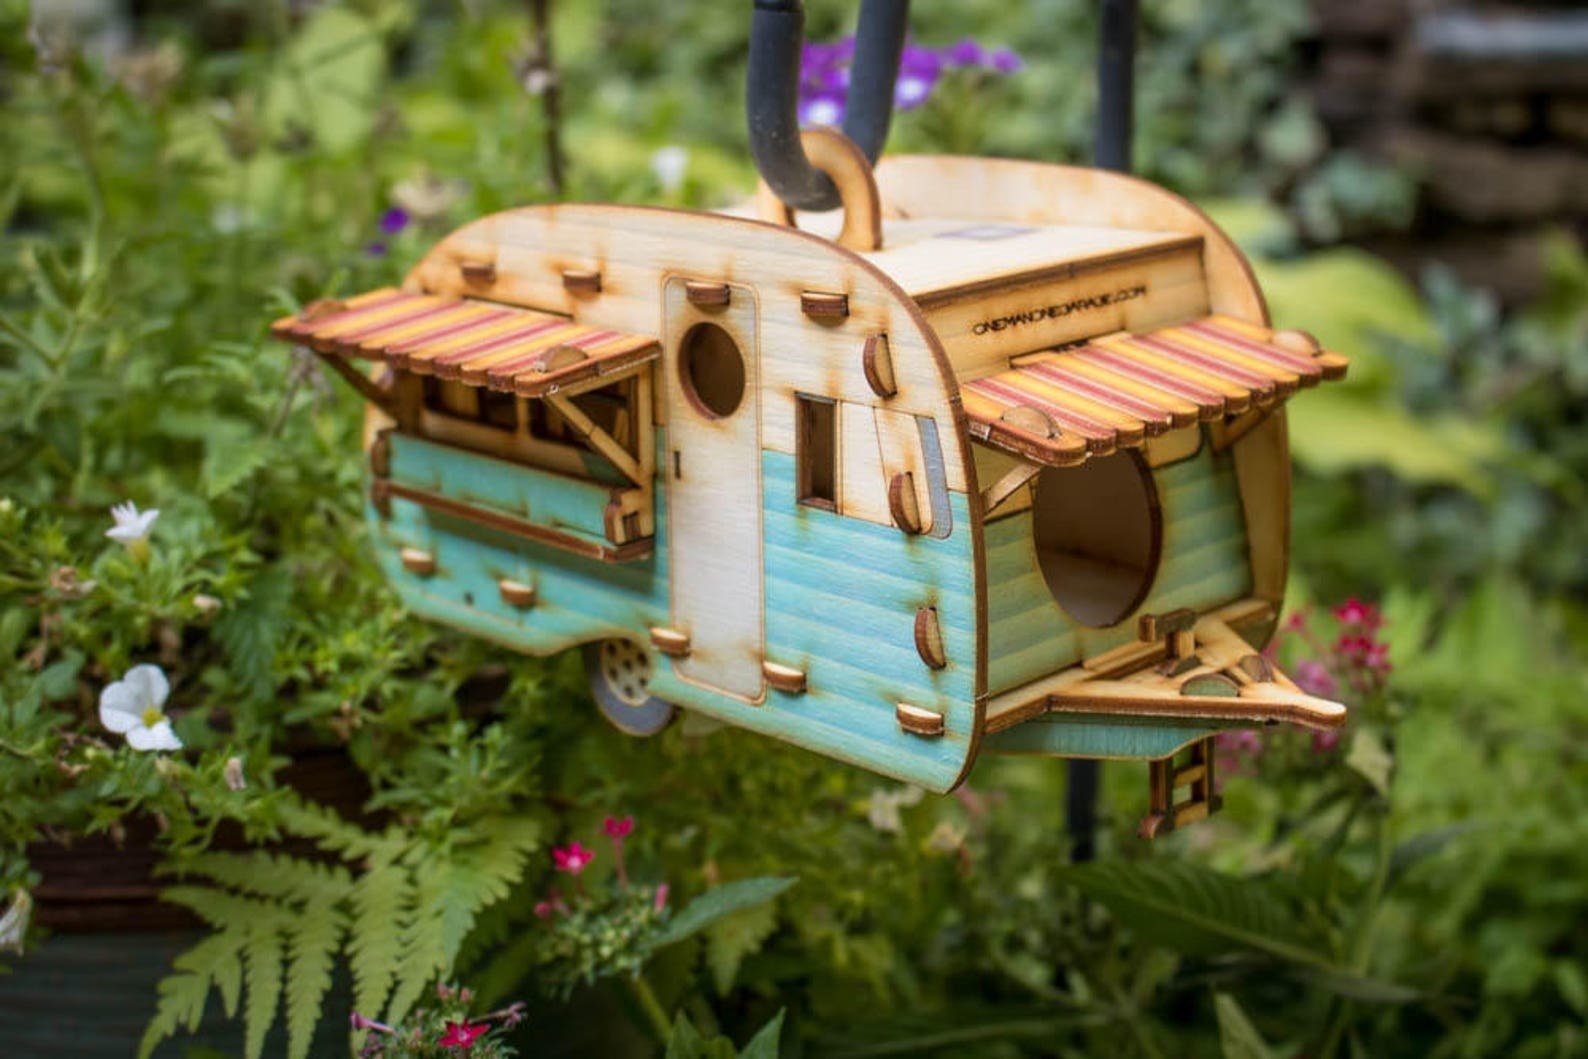 The vintage camper birdhouse in blue hanging with plants in the background